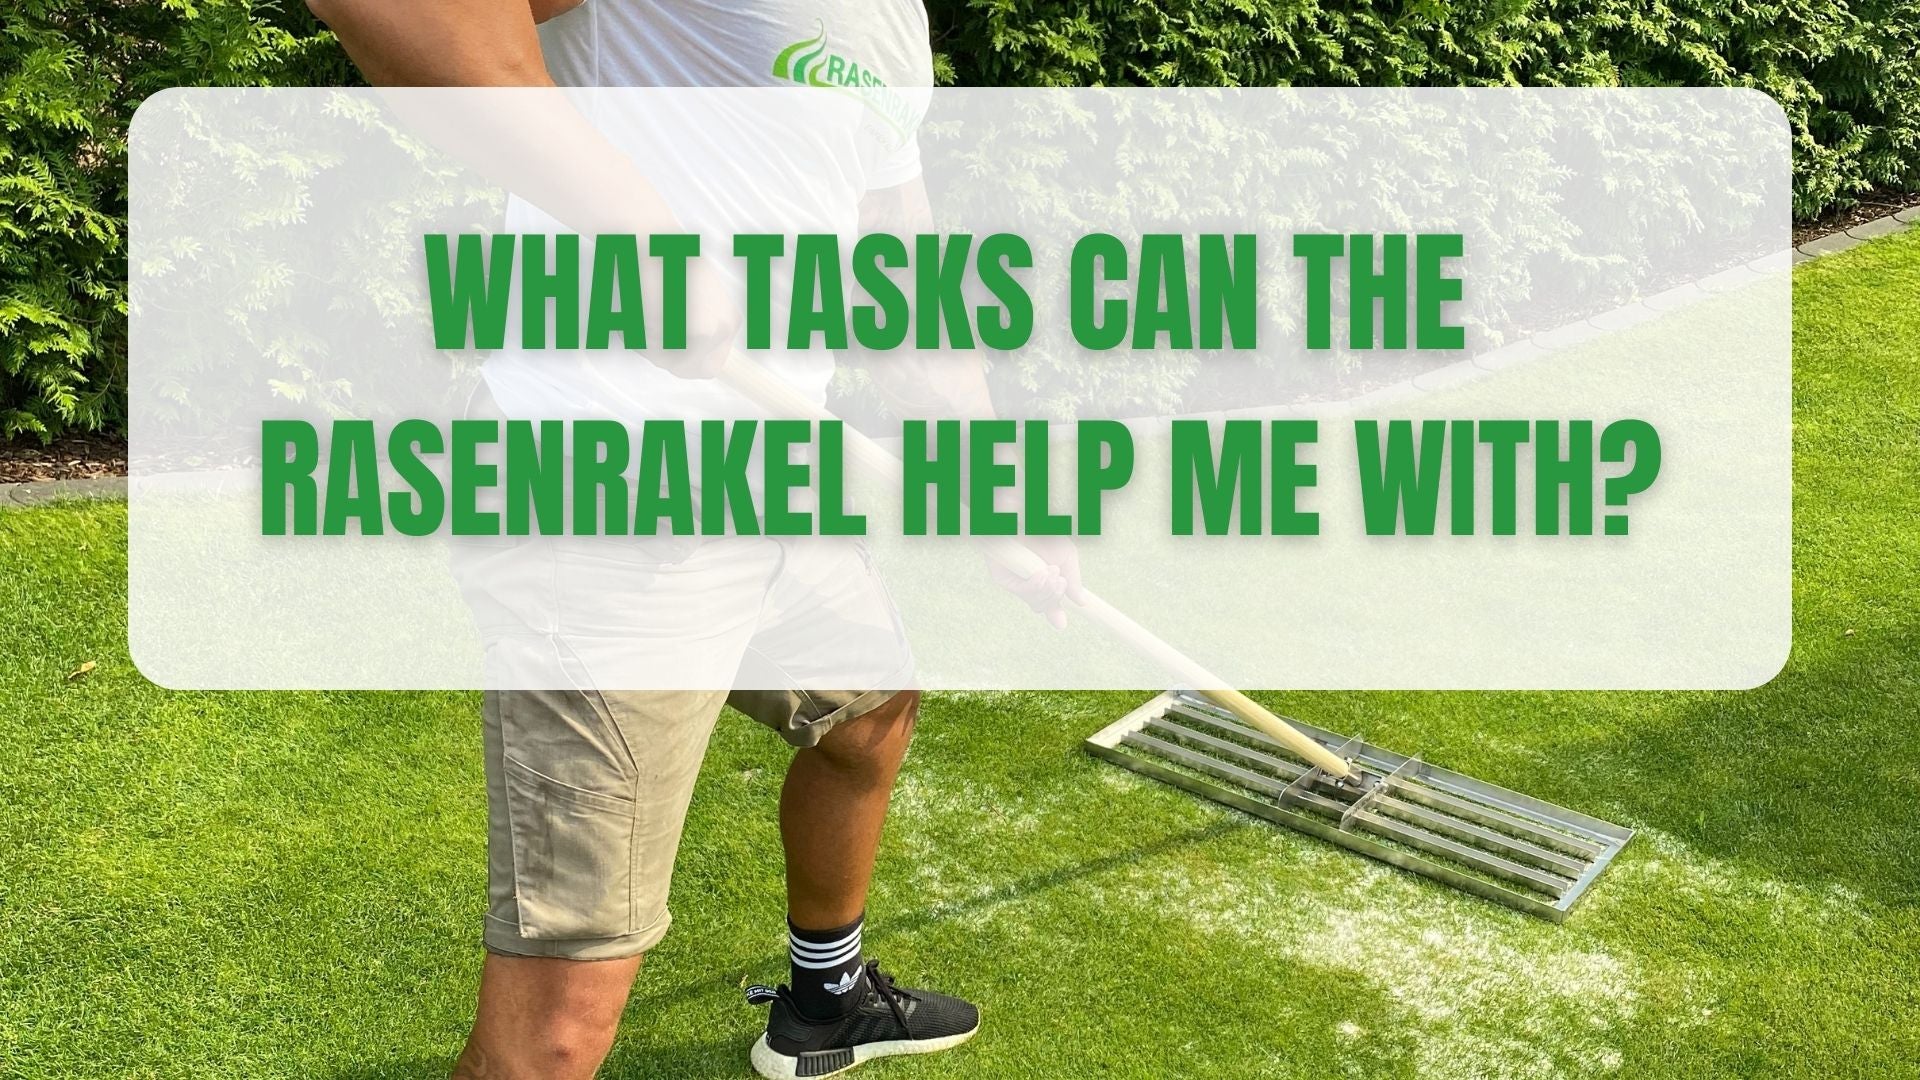 What tasks can the Rasenrakel help me with?